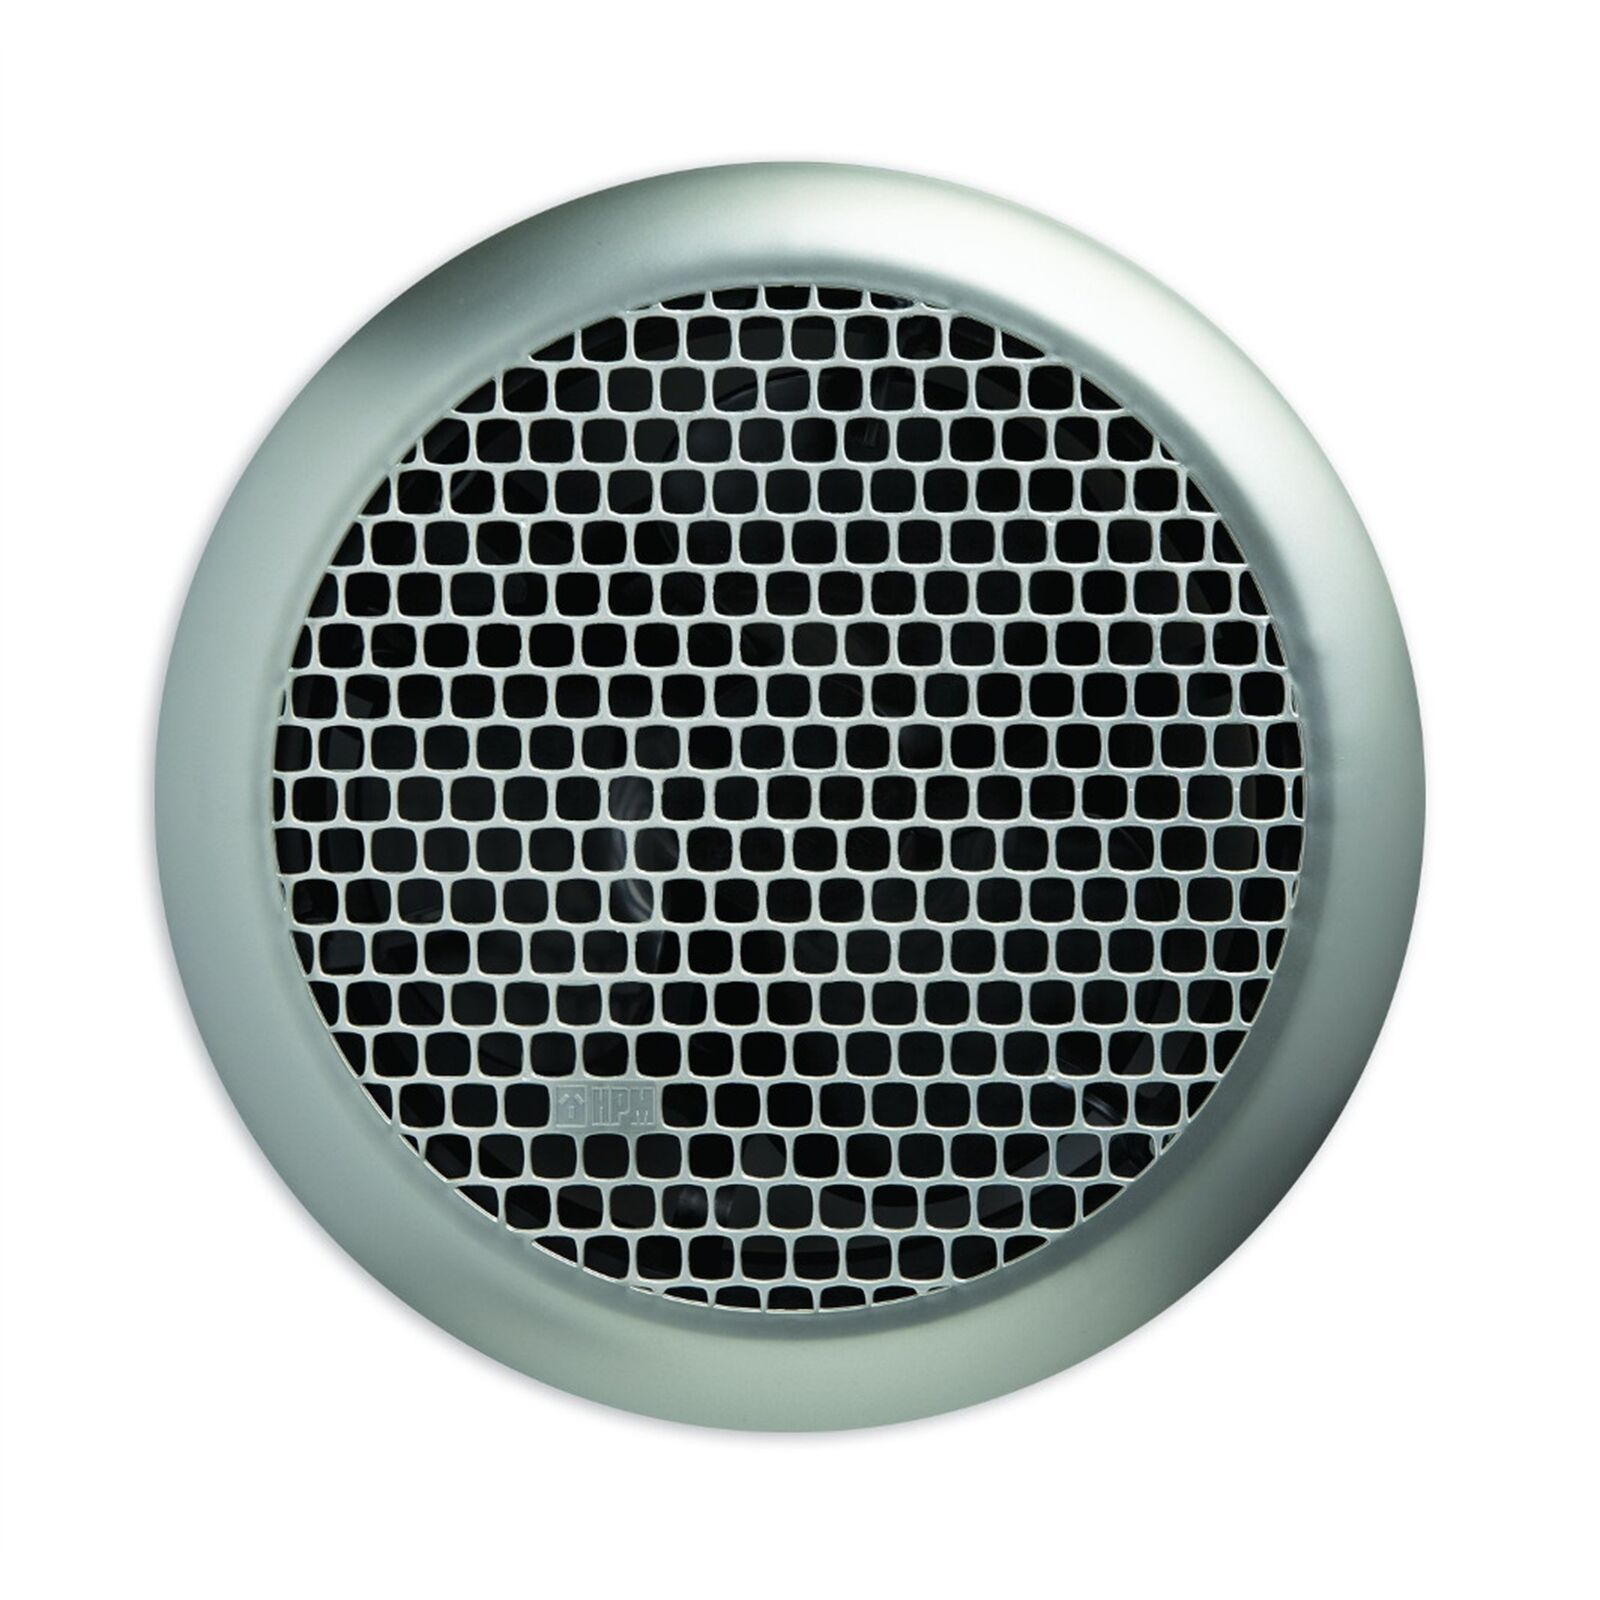 Hpm Ef200rdms Exhaust Fan Kit Strong Air Extraction Round Honeycomb Silver 200mm pertaining to dimensions 1600 X 1600